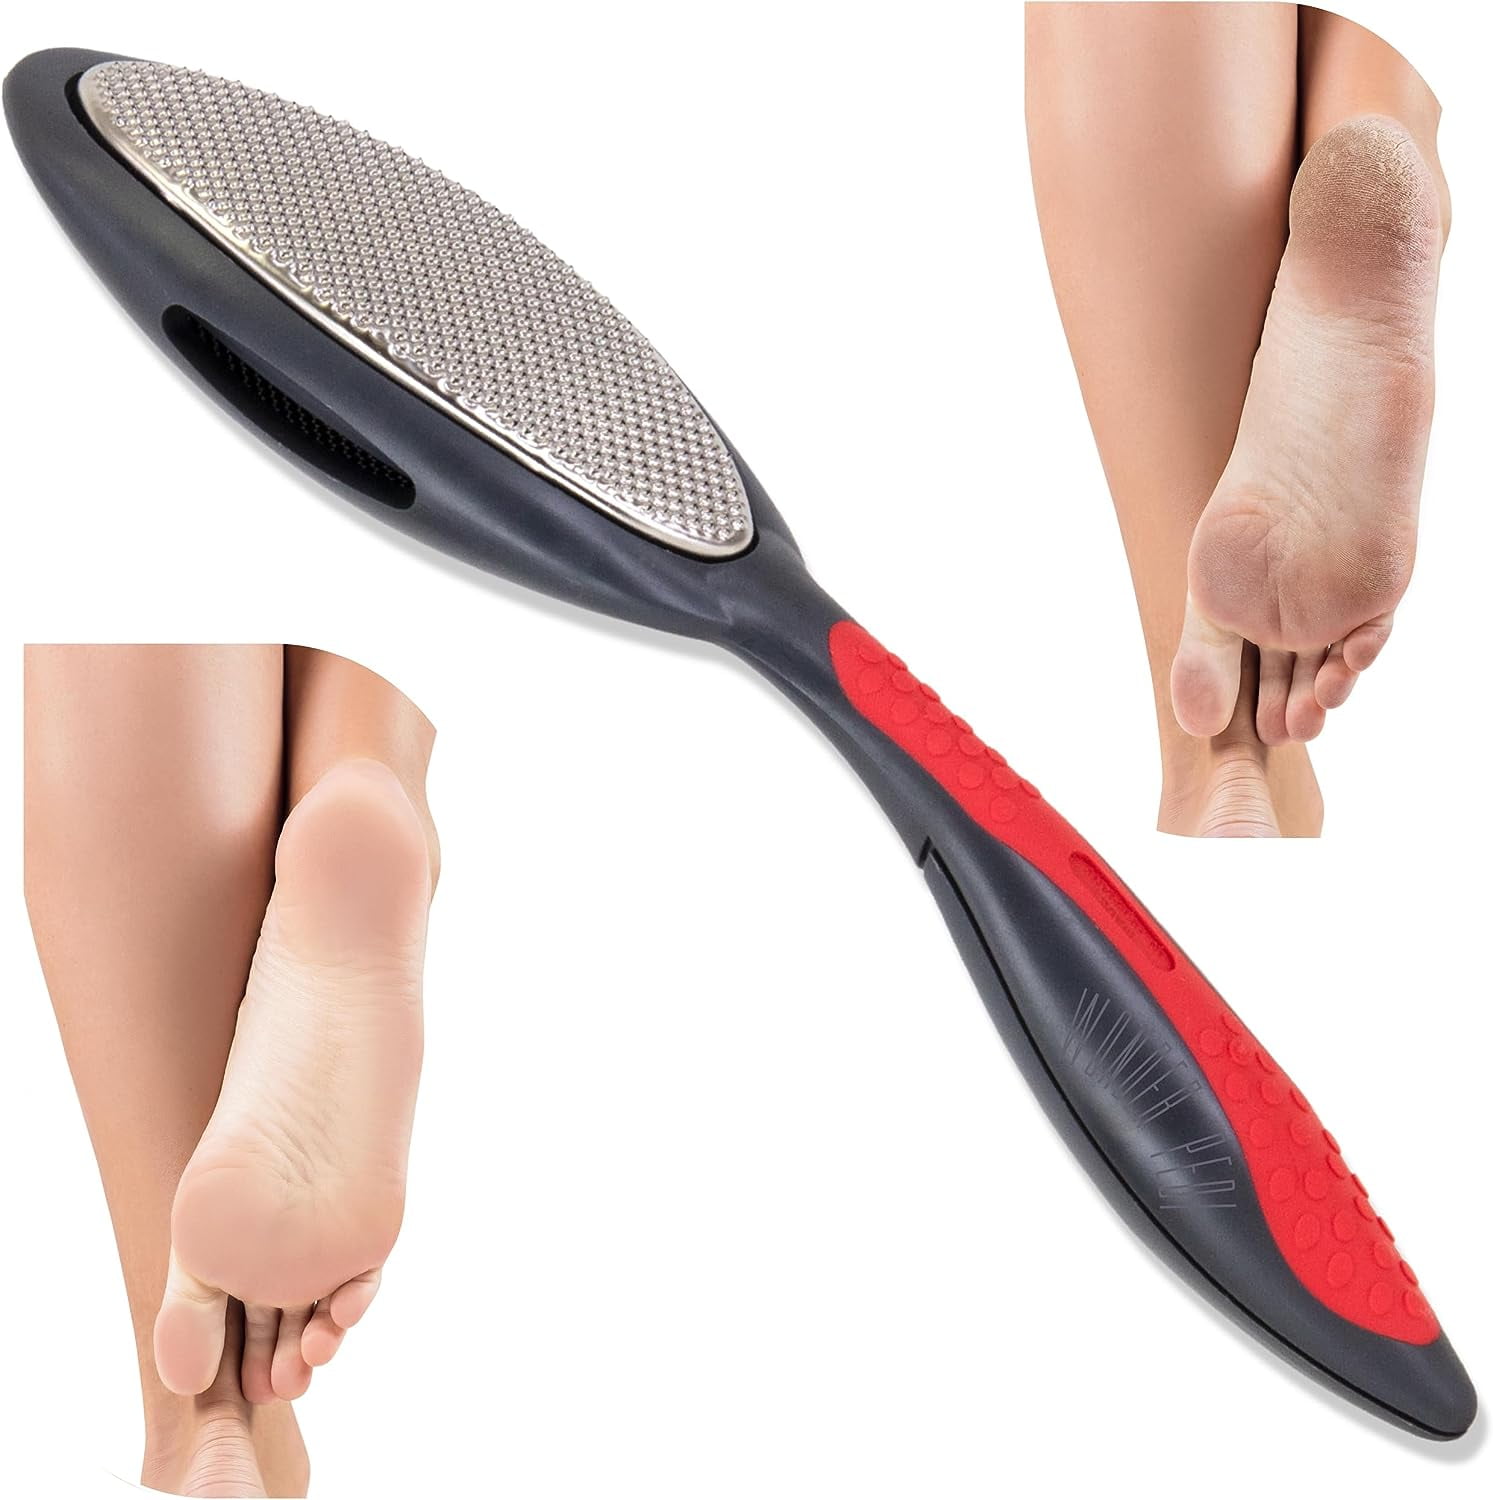 Amope Splashproof Electronic Foot File Foot Spa Pedicure Tool Callous  Remover-Pedi Perfect Advance 2 Speed